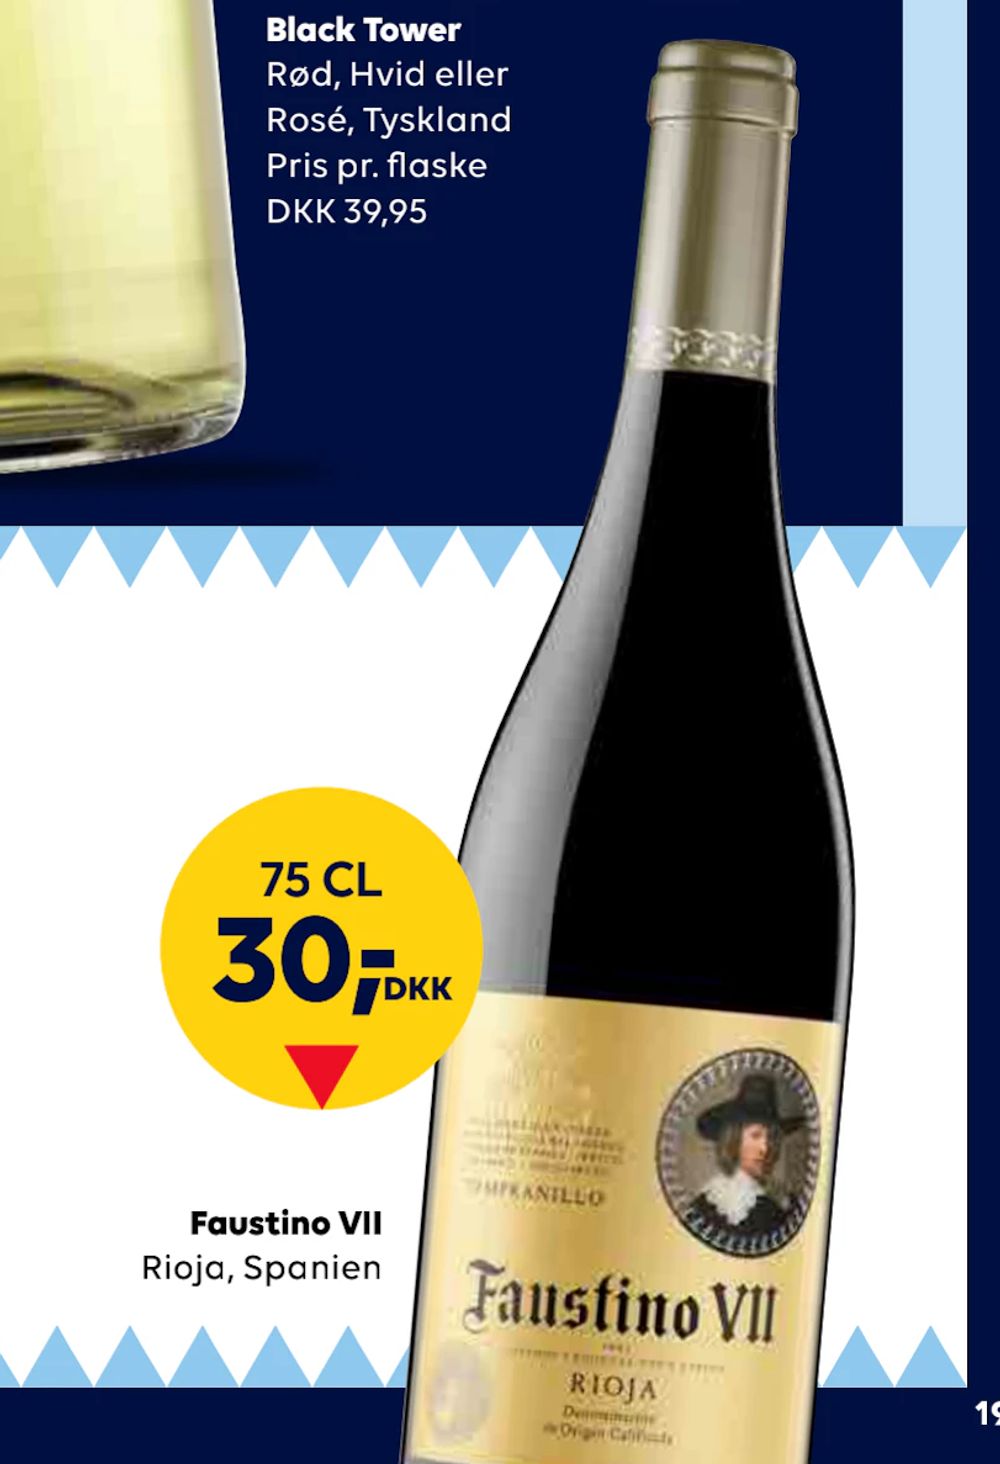 Deals on Faustino VII from BorderShop at 30 kr.